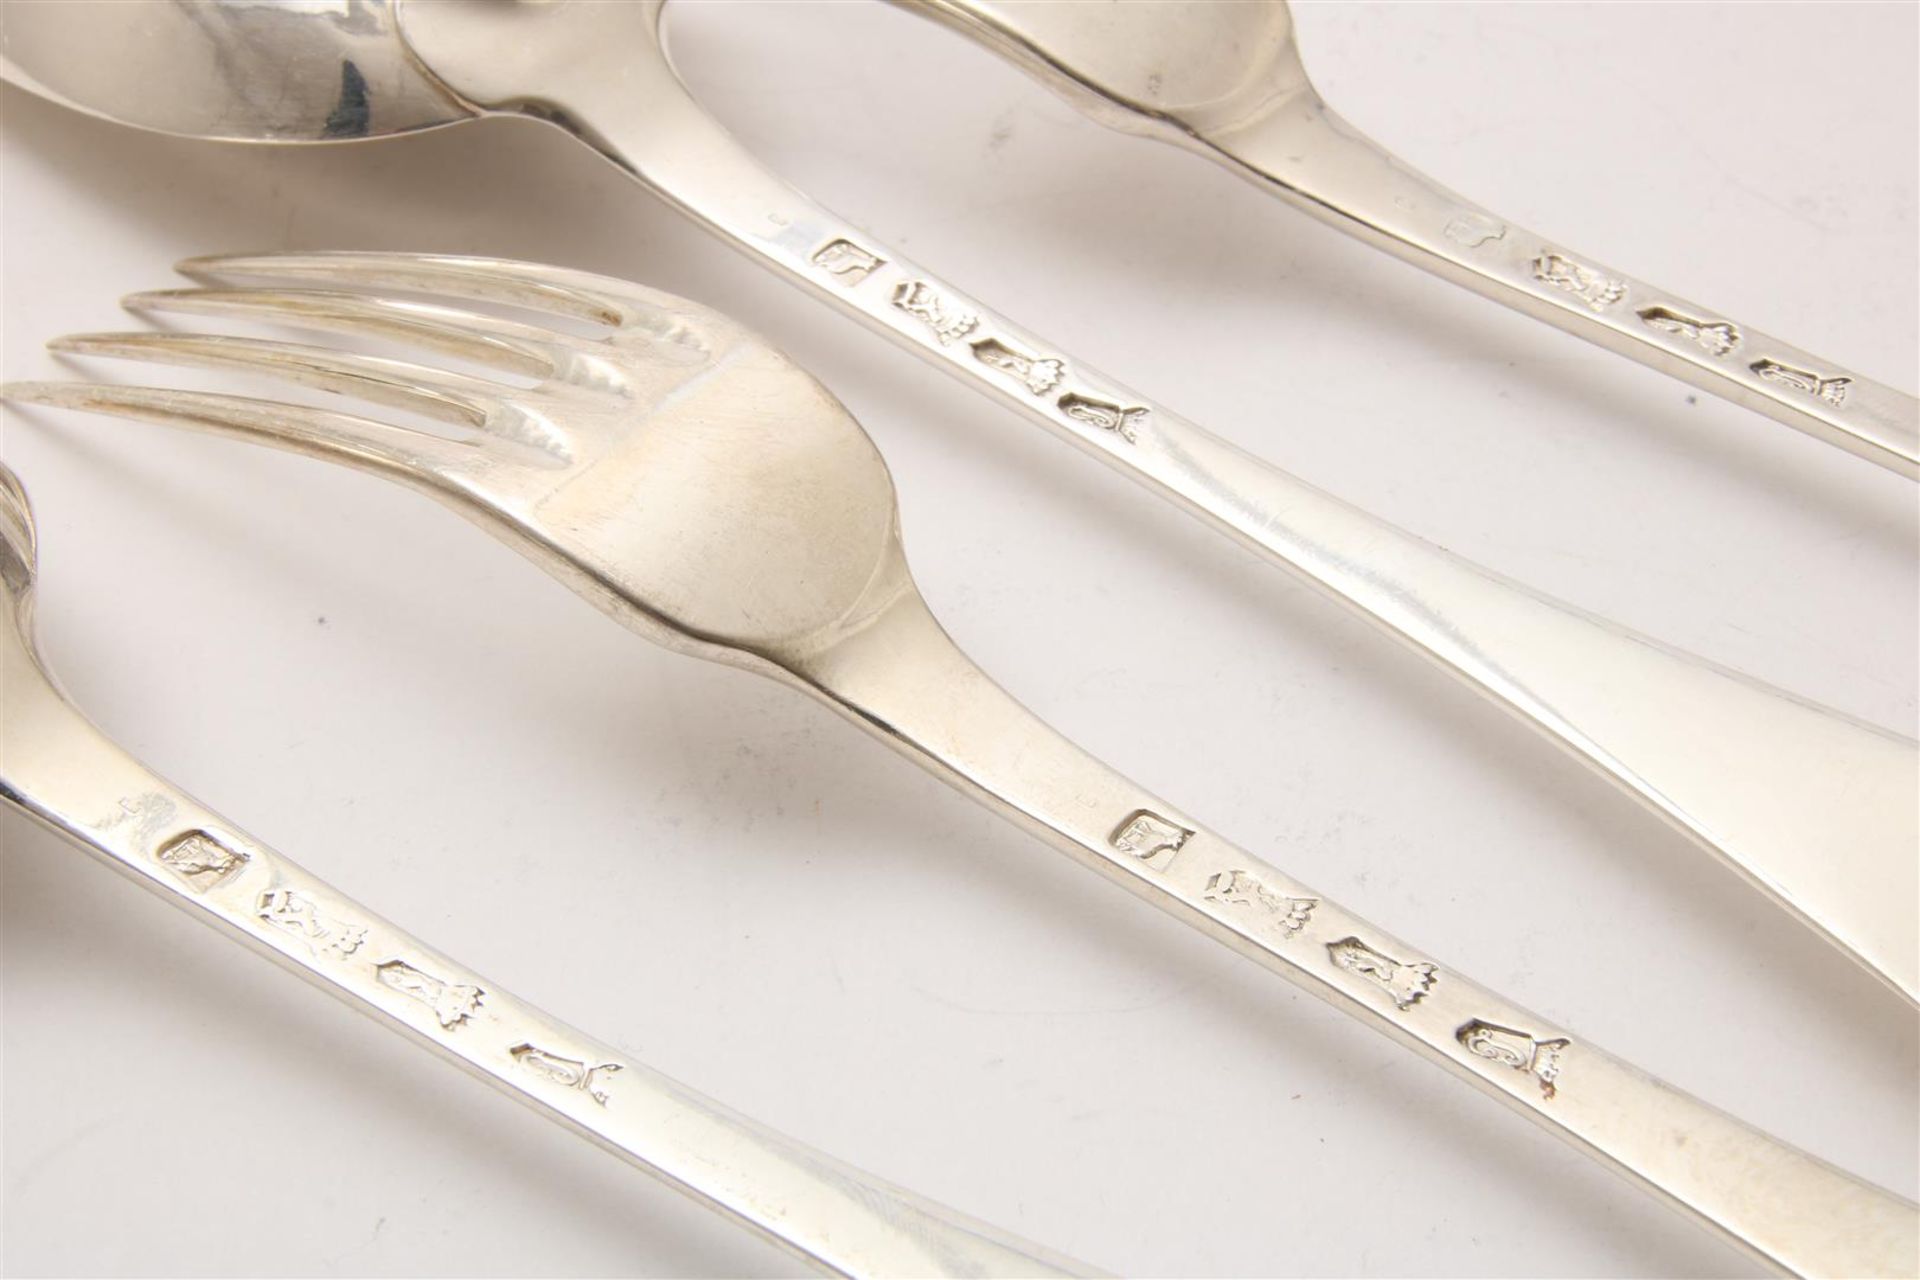 Series of 6 silver large spoons, The Hague, master mark Johan S. Bauer, year stamp 1782, alloy 925/ - Image 2 of 2